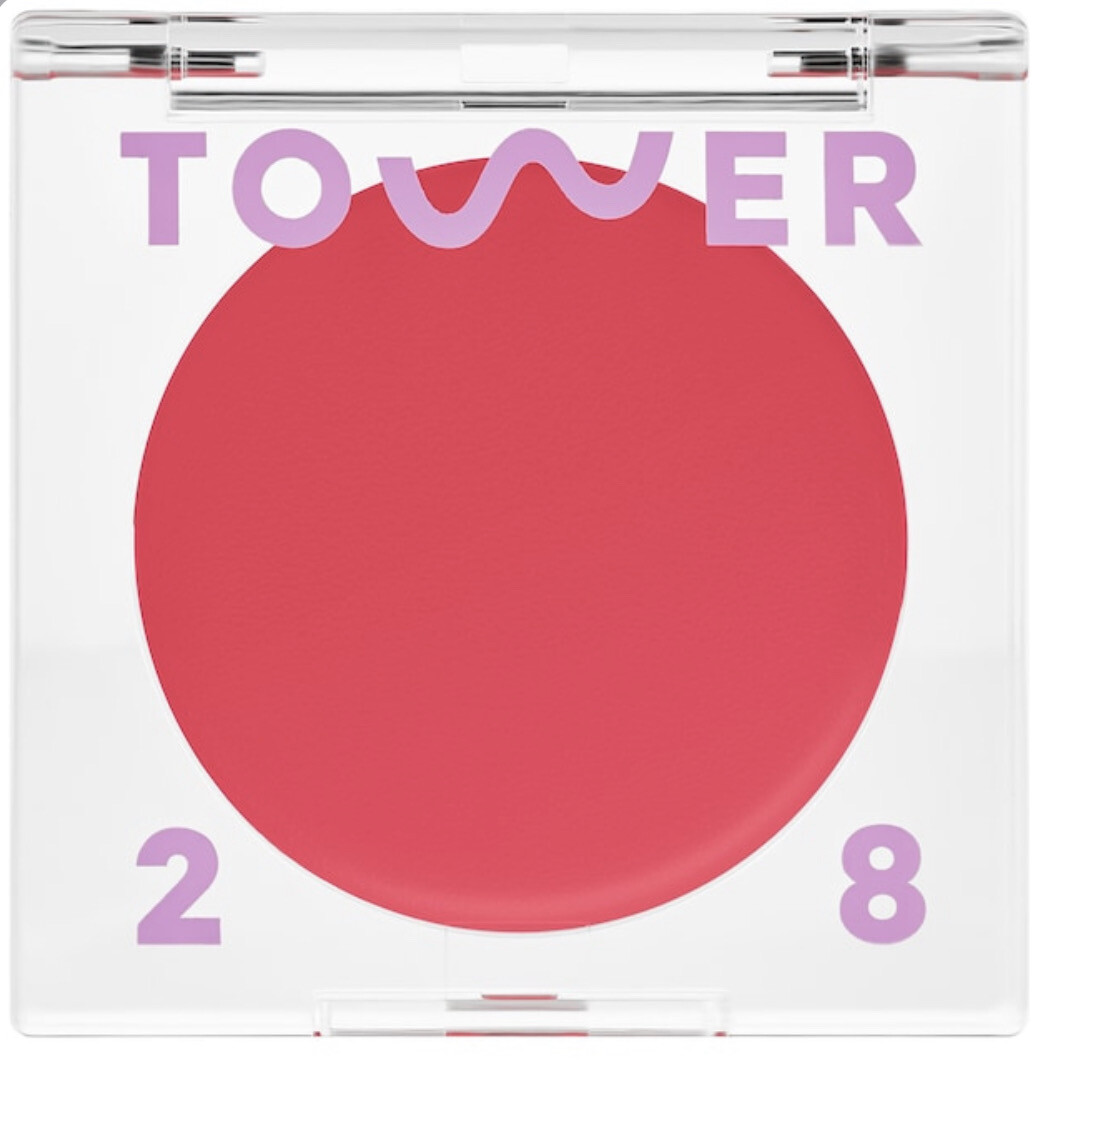 Tower 28 - BeachPlease Luminous Tinted Balm | Happy Hour - sun-kissed coral pink